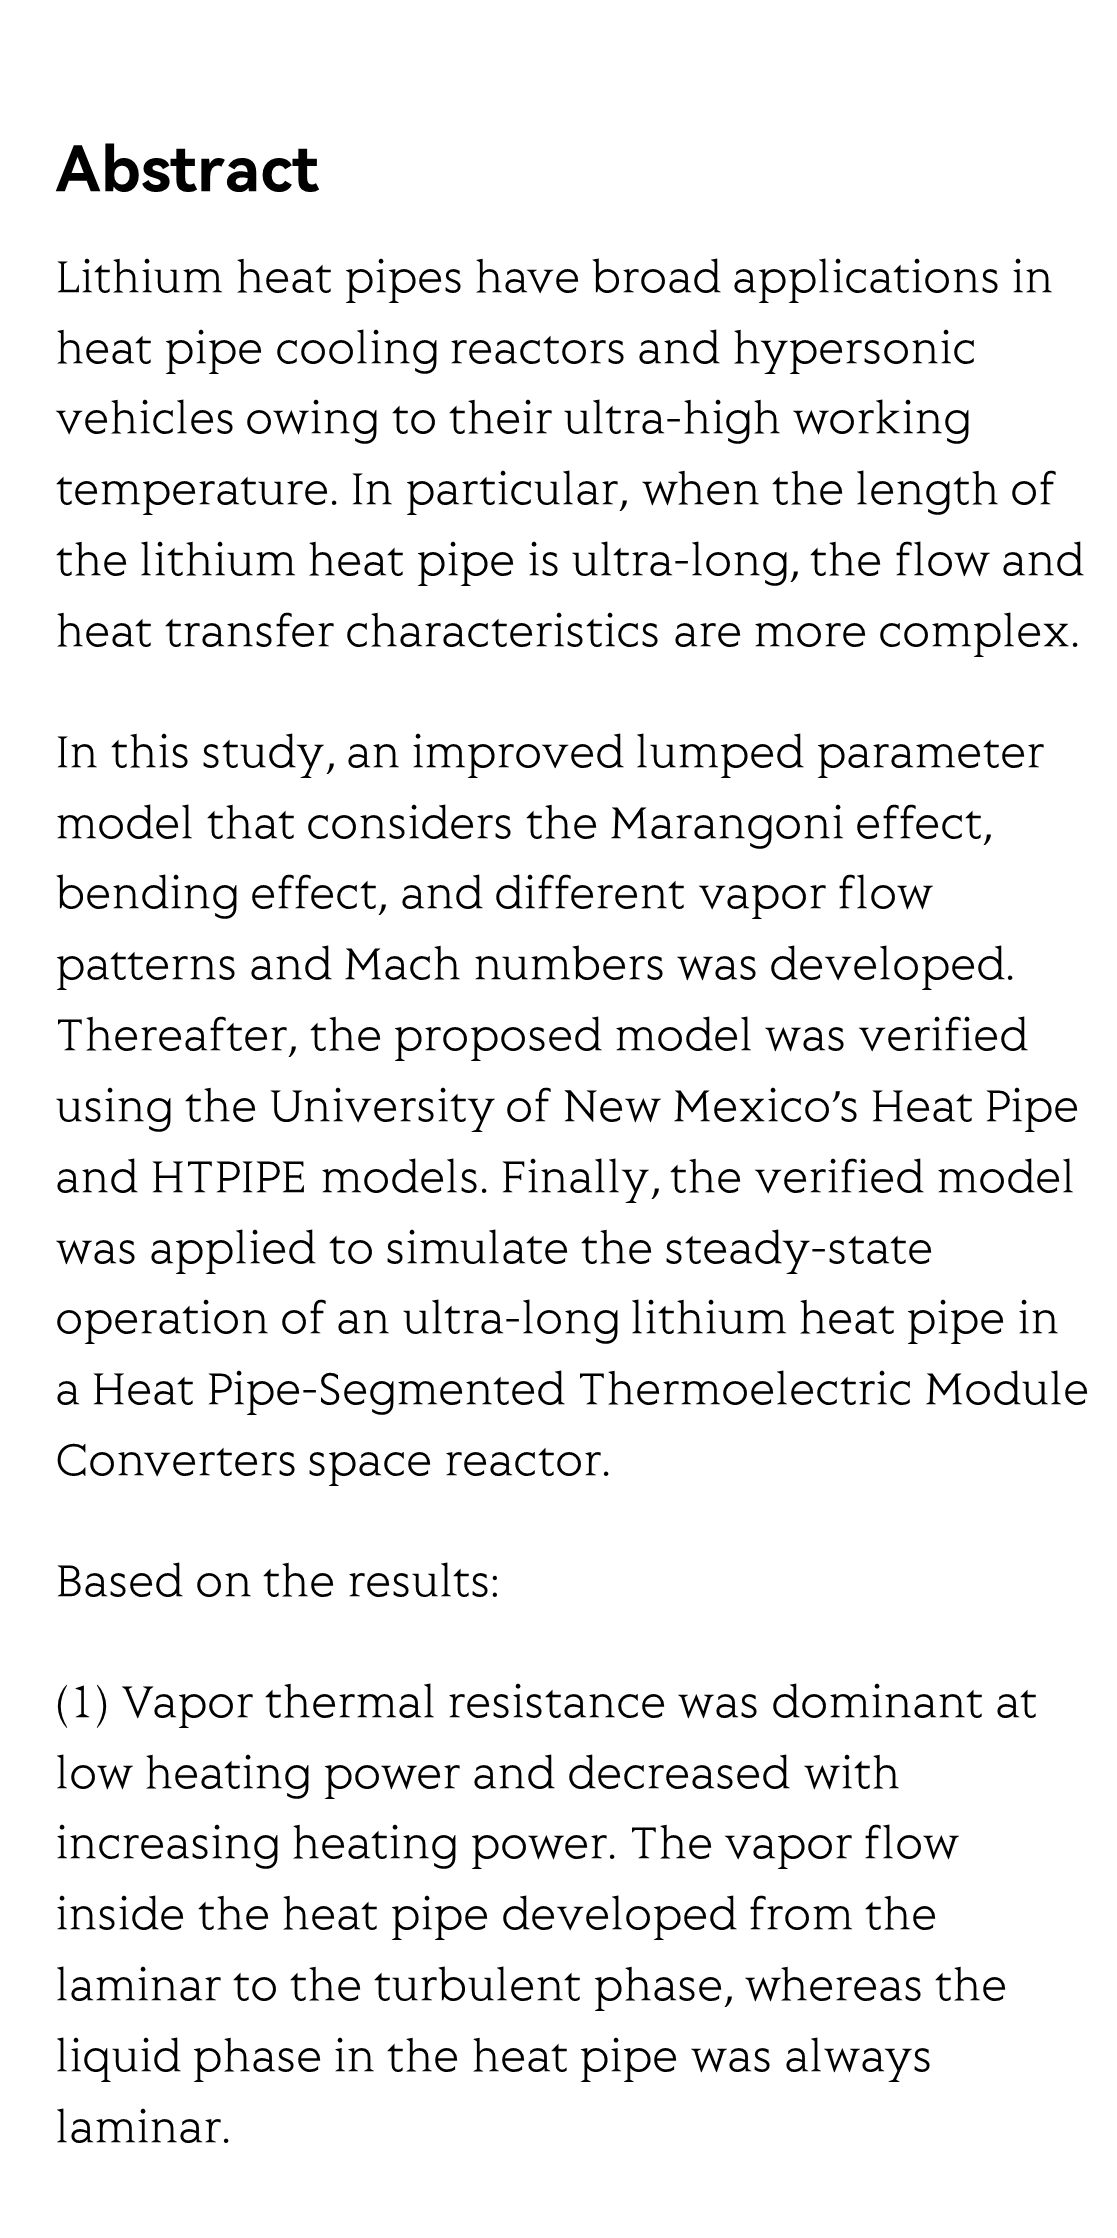 Performance evaluation of ultra-long lithium heat pipe using an improved lumped parameter model_2